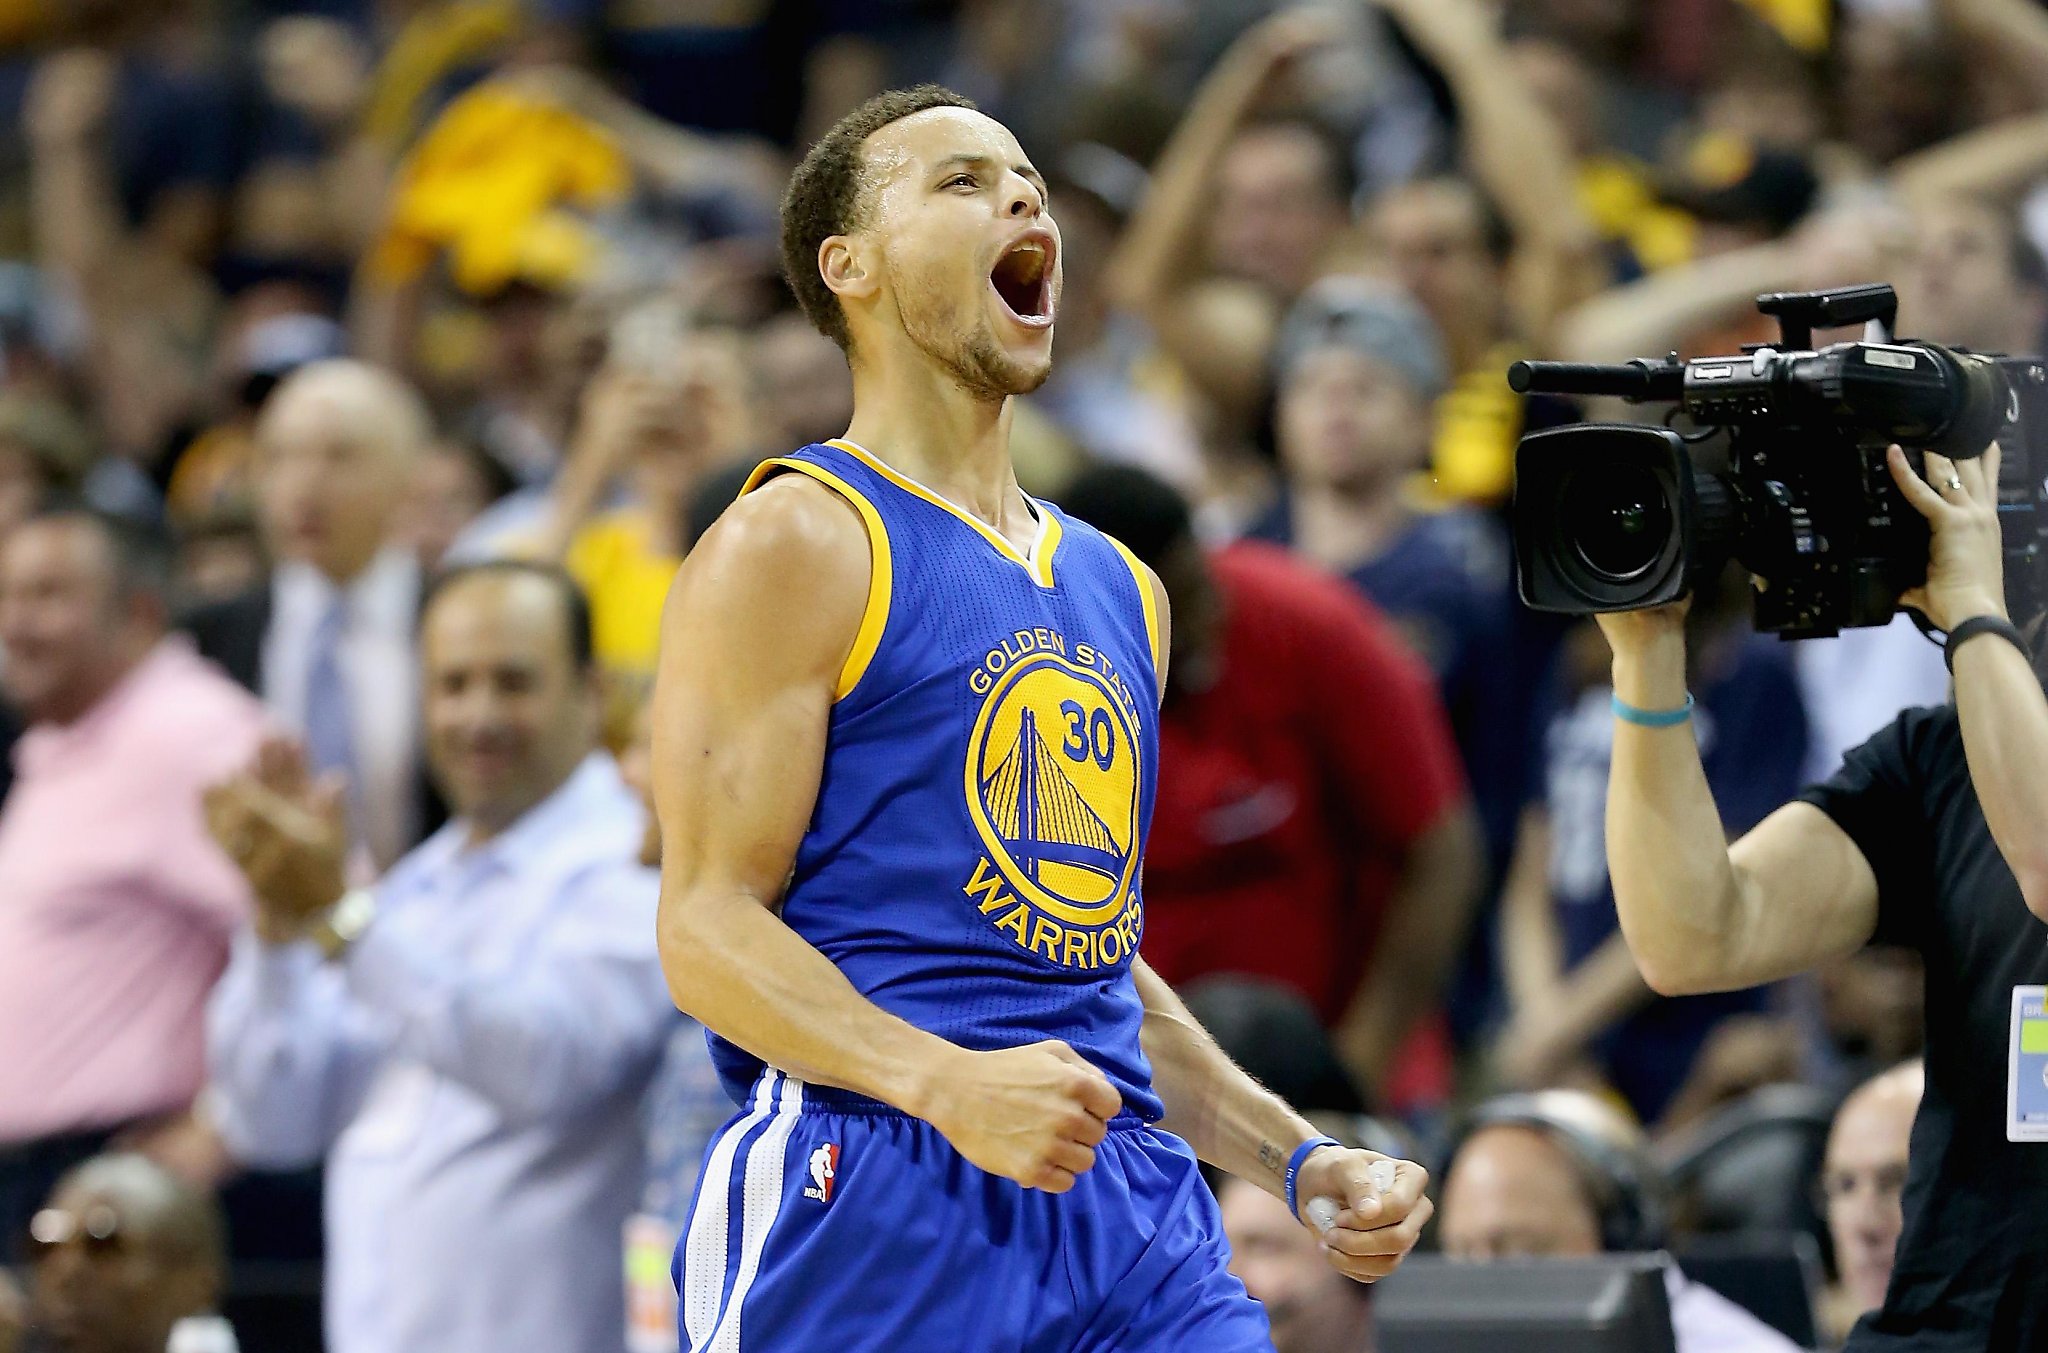 May 15, 2015: Steph Curry hits 62-footer, Warriors eliminate Grizzlies